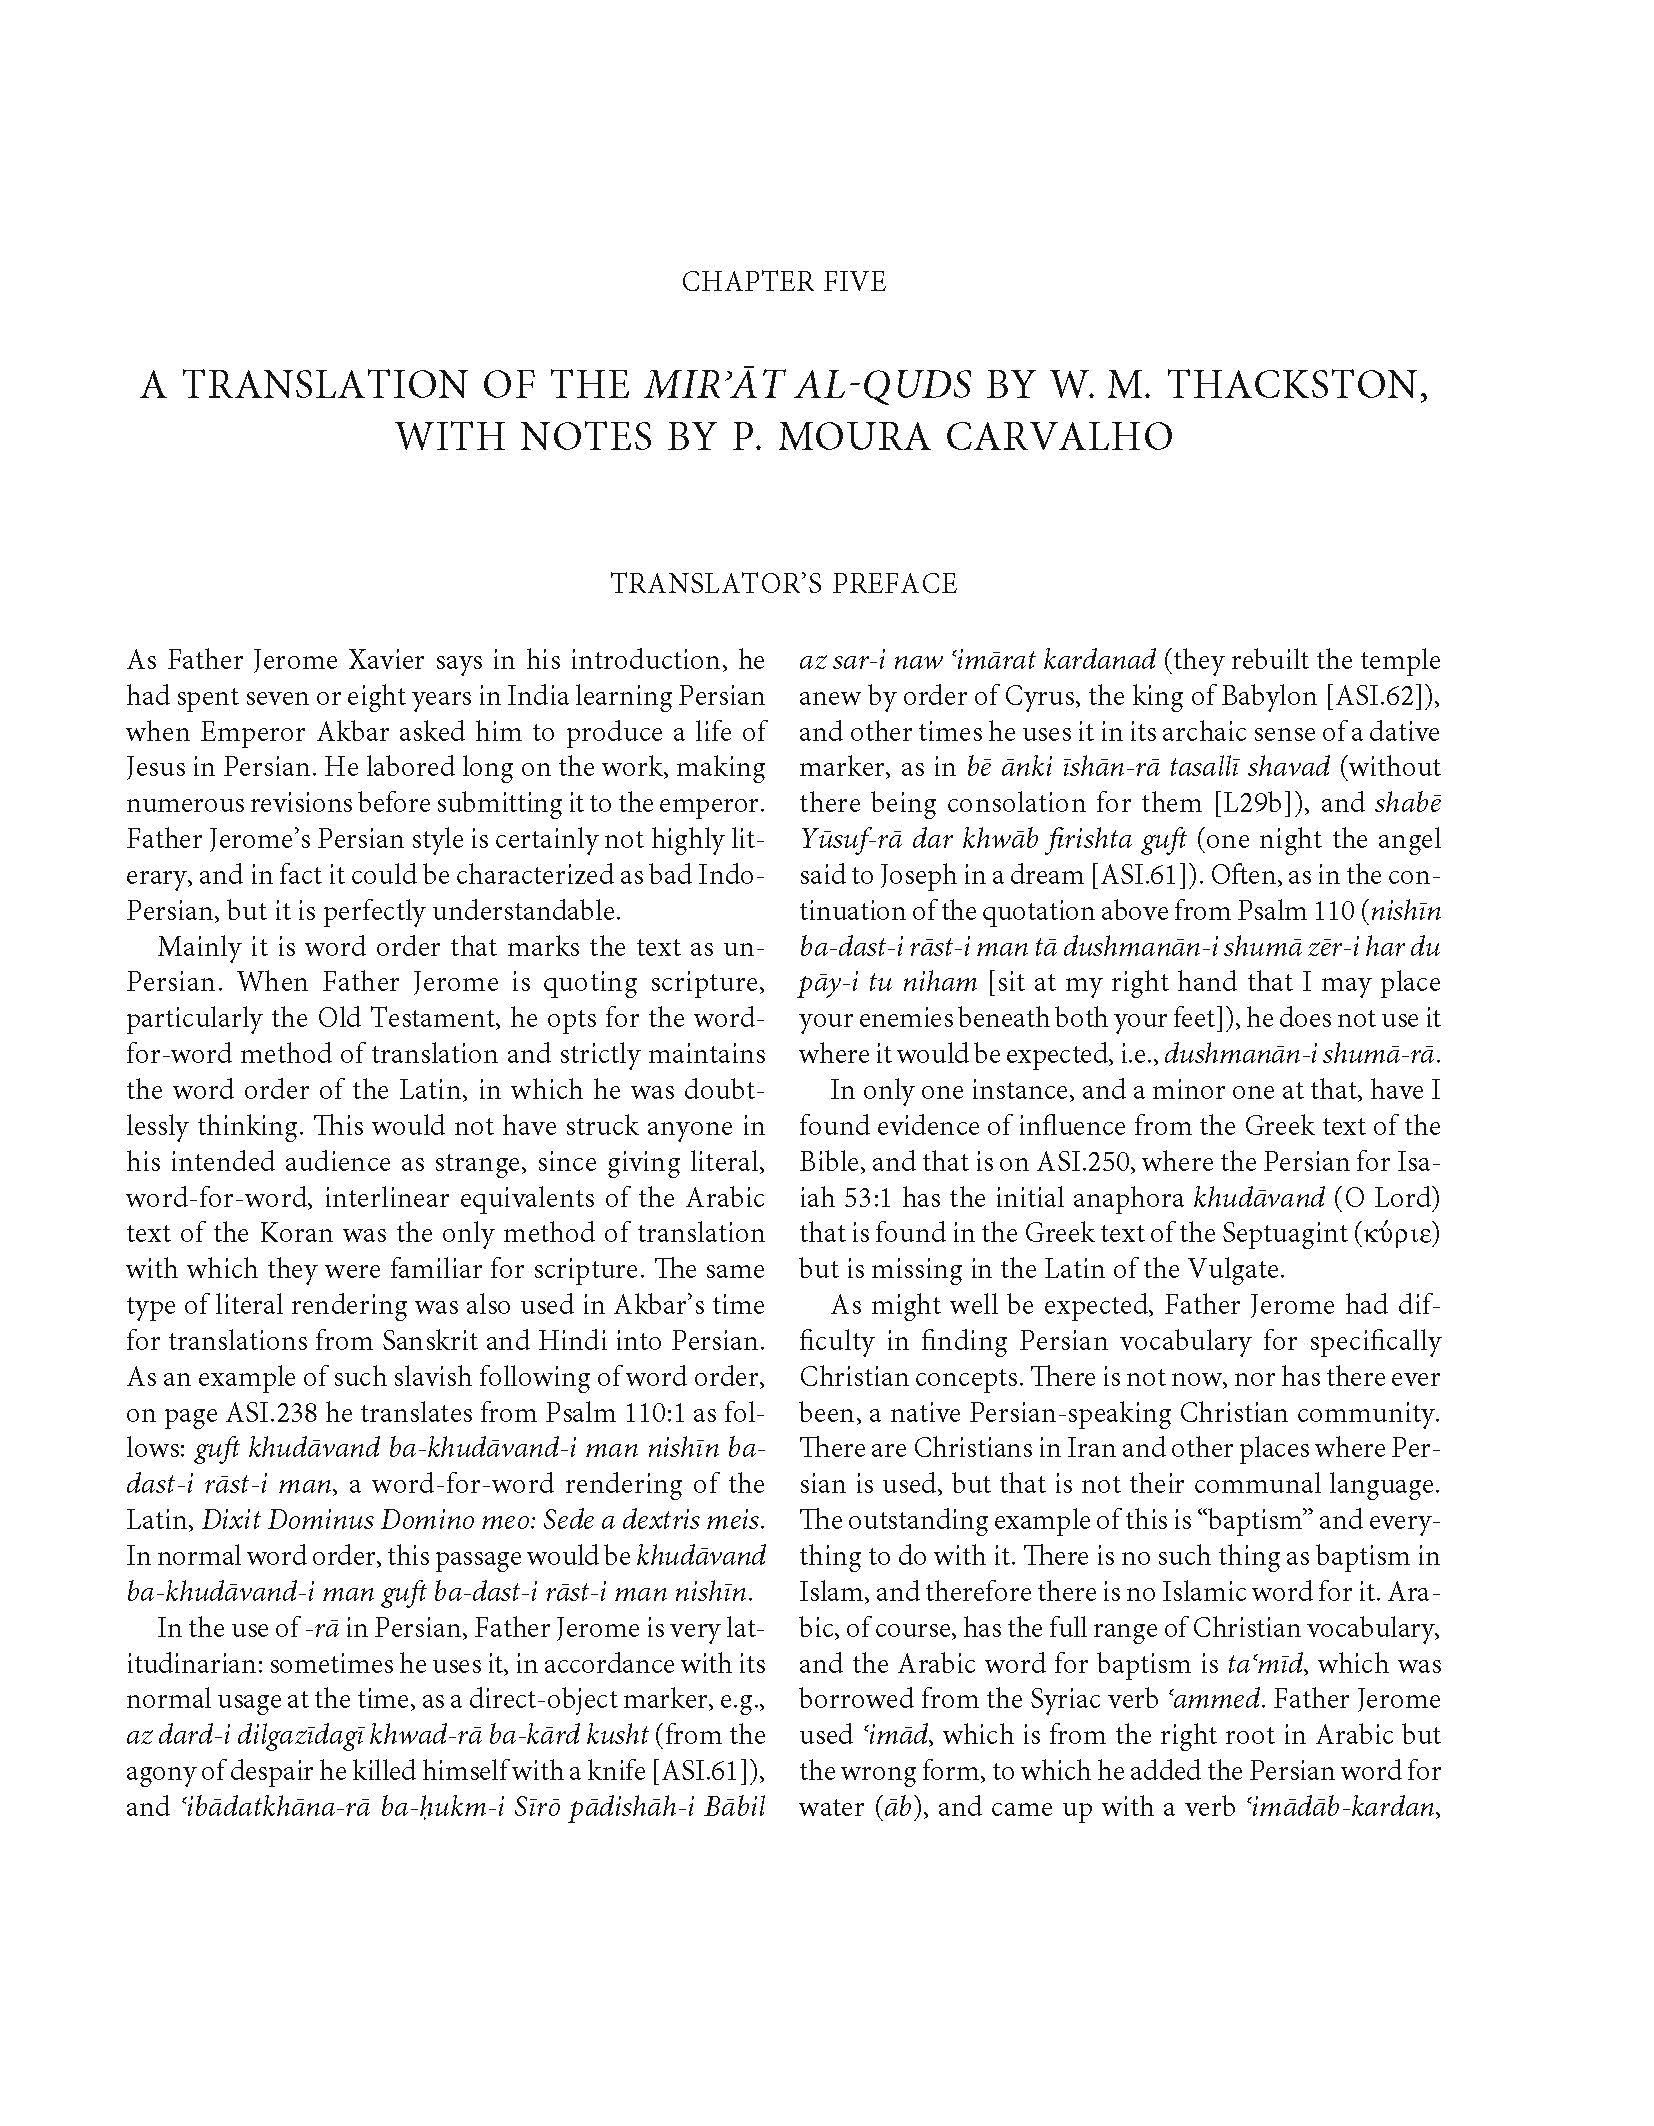 Chapter 5: A Translation of the Mir'at al-Quds by W. M. Thackston, With Notes by P. Moura Carvalho